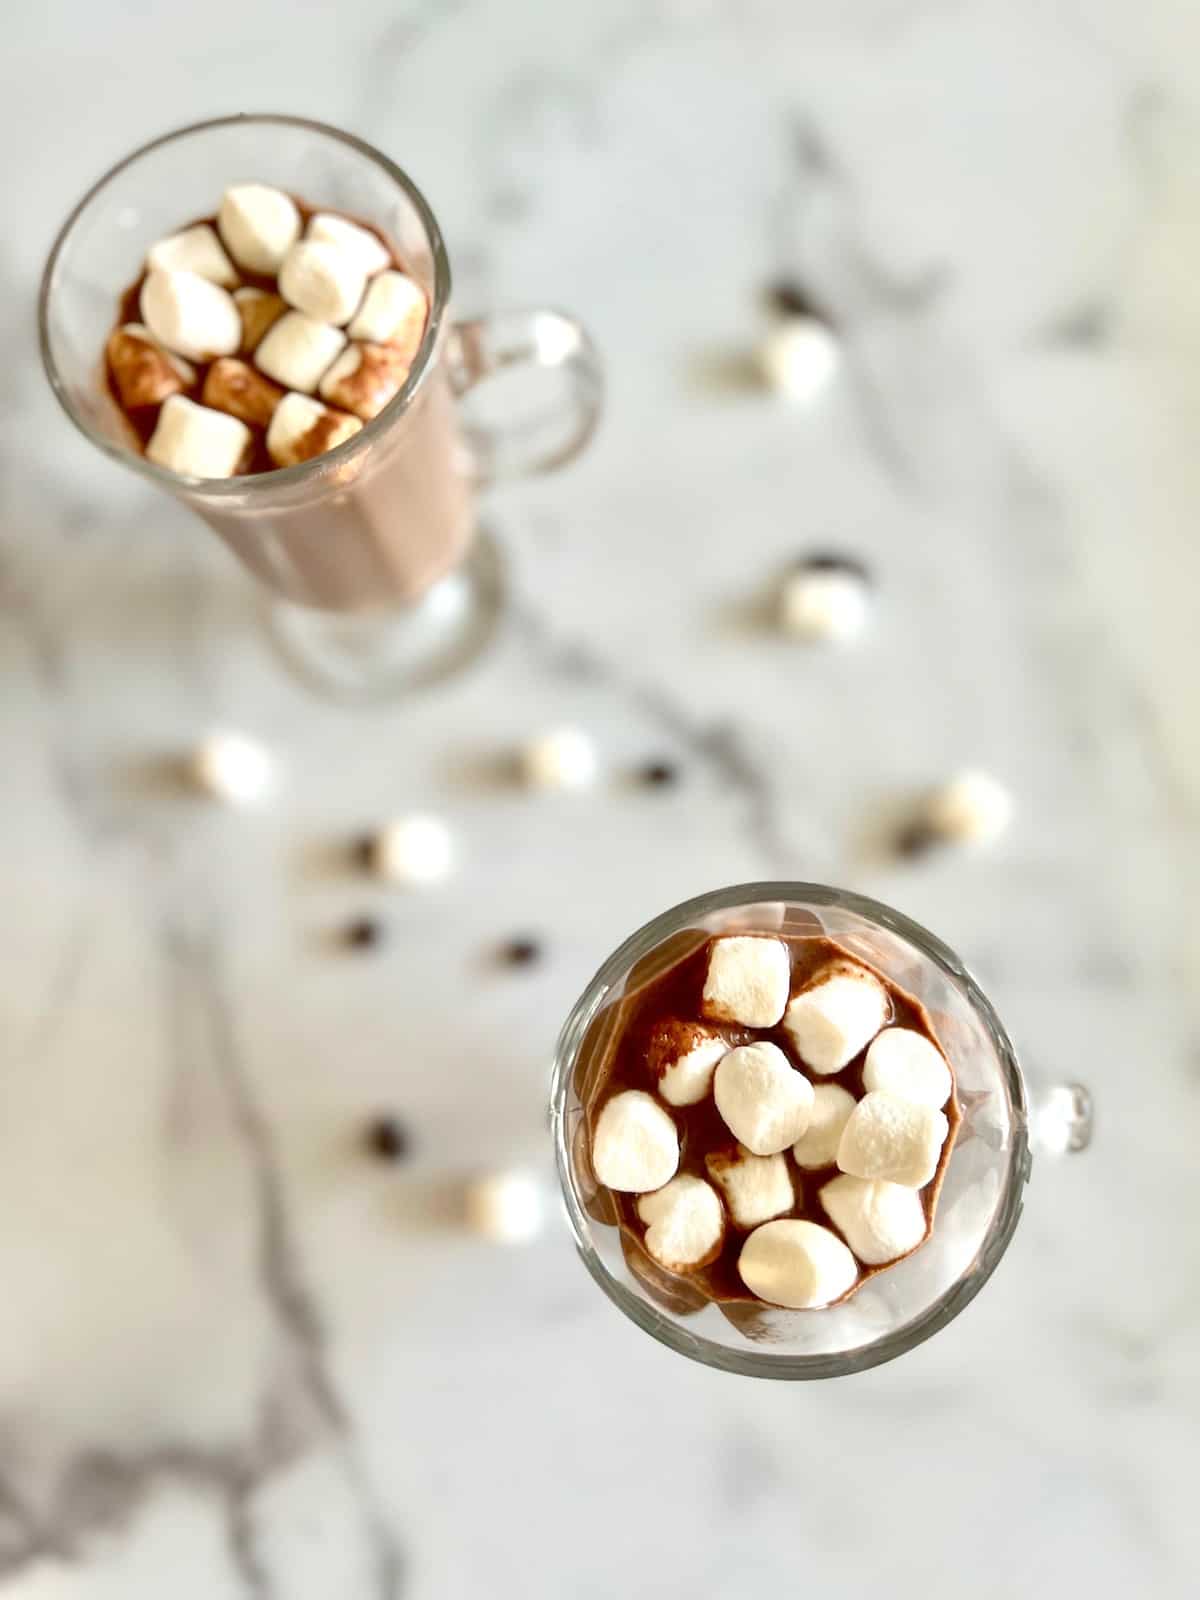 Best Hot Chocolate with Chocolate Chips Overhead of two glasses of hot chocolate topped with marshmallows.